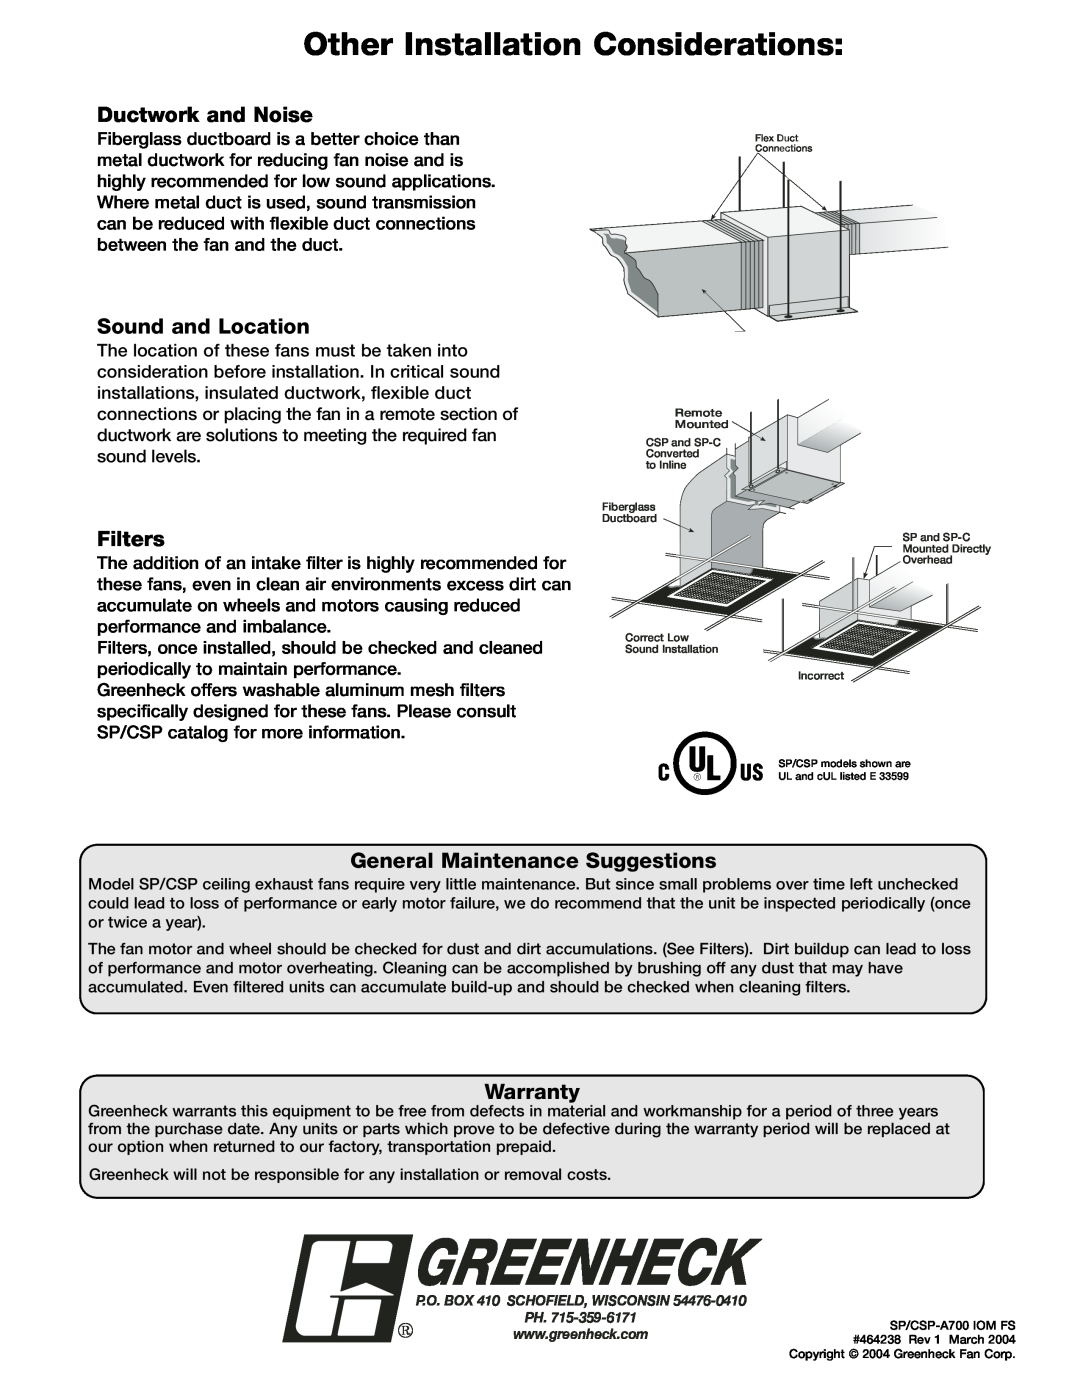 Greenheck Fan SP-A700 manual Other Installation Considerations, Ductwork and Noise, Sound and Location, Filters, Warranty 